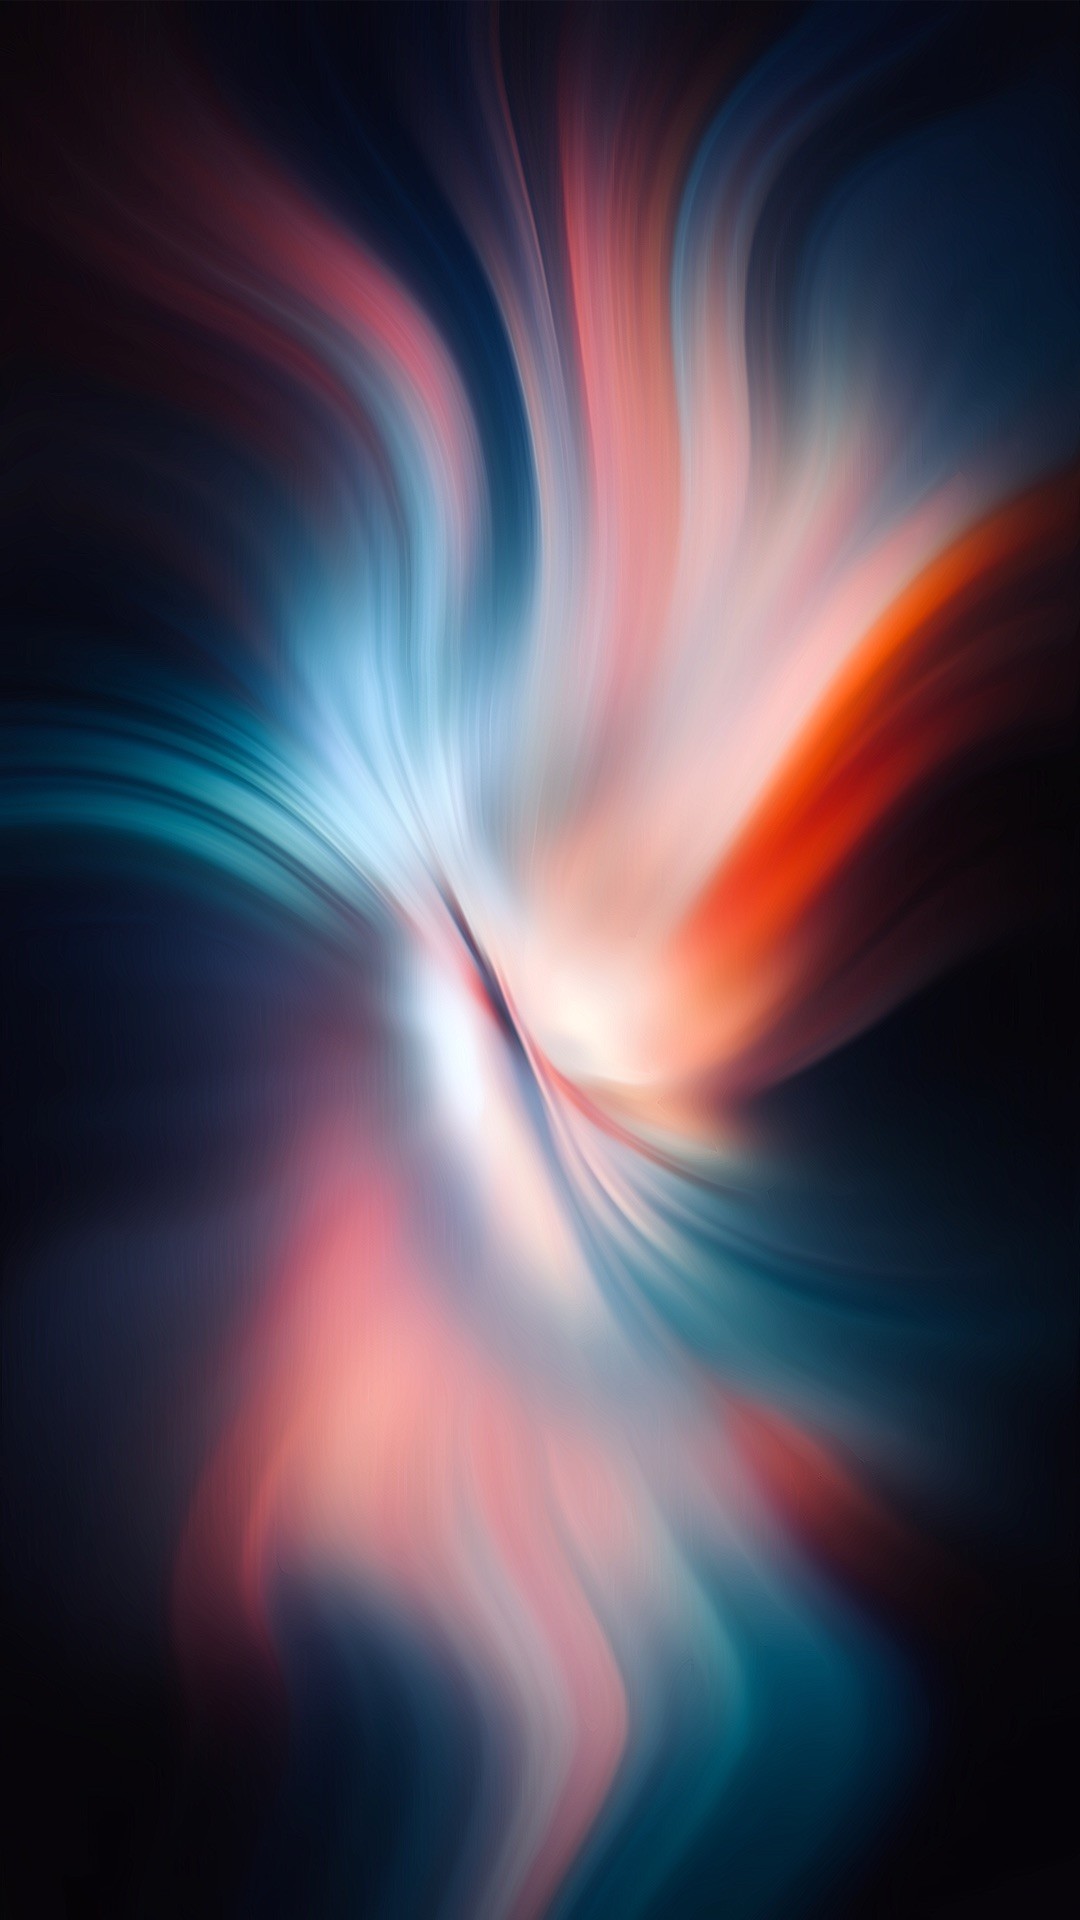 Abstract Art Phone Wallpaper (74+ images)